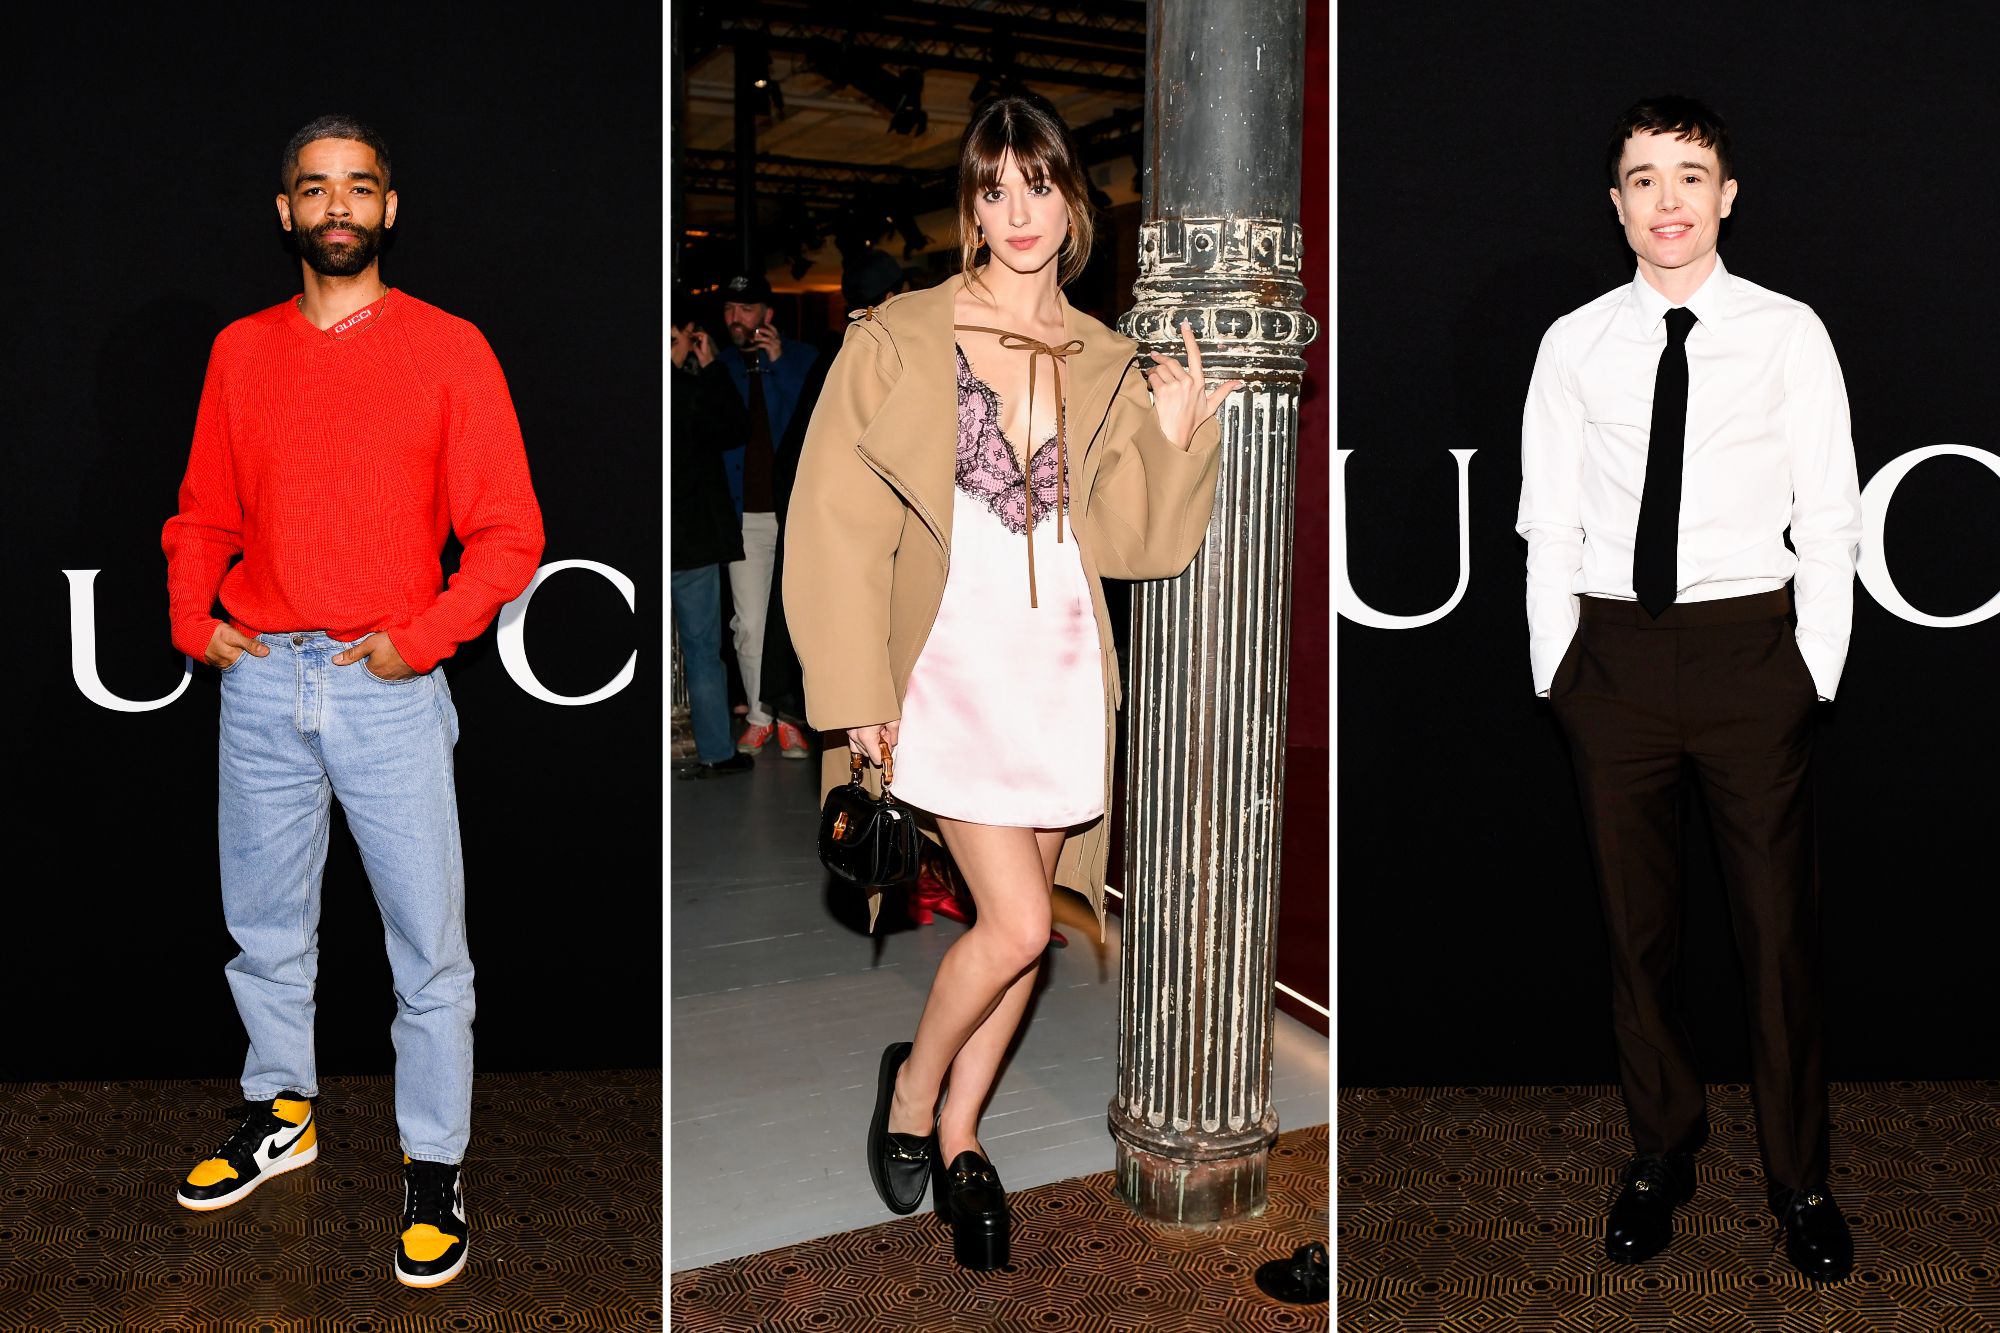 Kingsley Ben-Adir, Daisy Edgar Jones, and Elliot Page visit the new Gucci boutique.